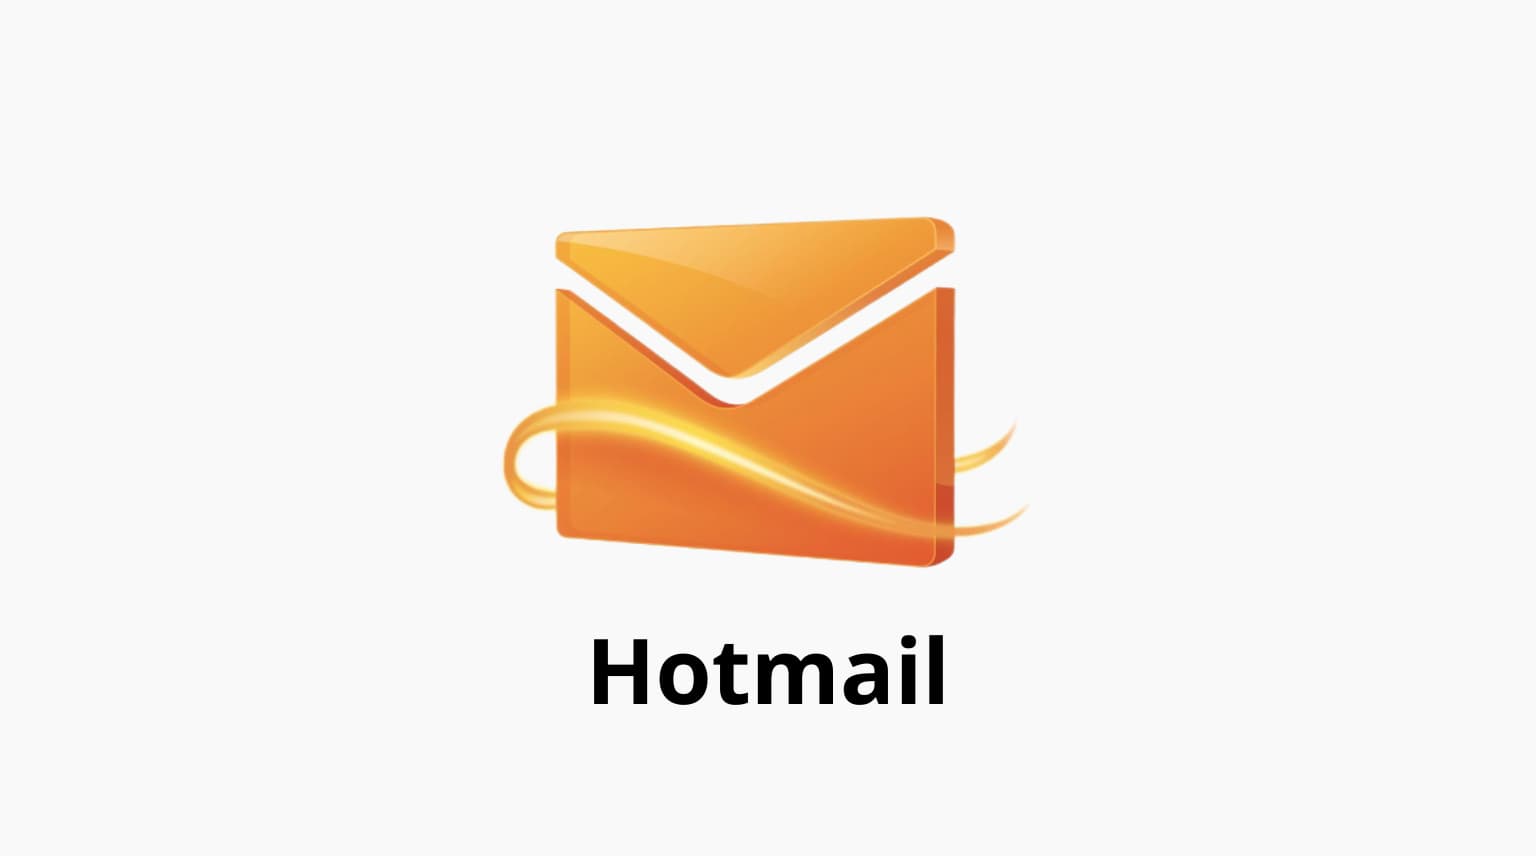 How to fix Hotmail or Outlook emails missing in the iPhone Mail app